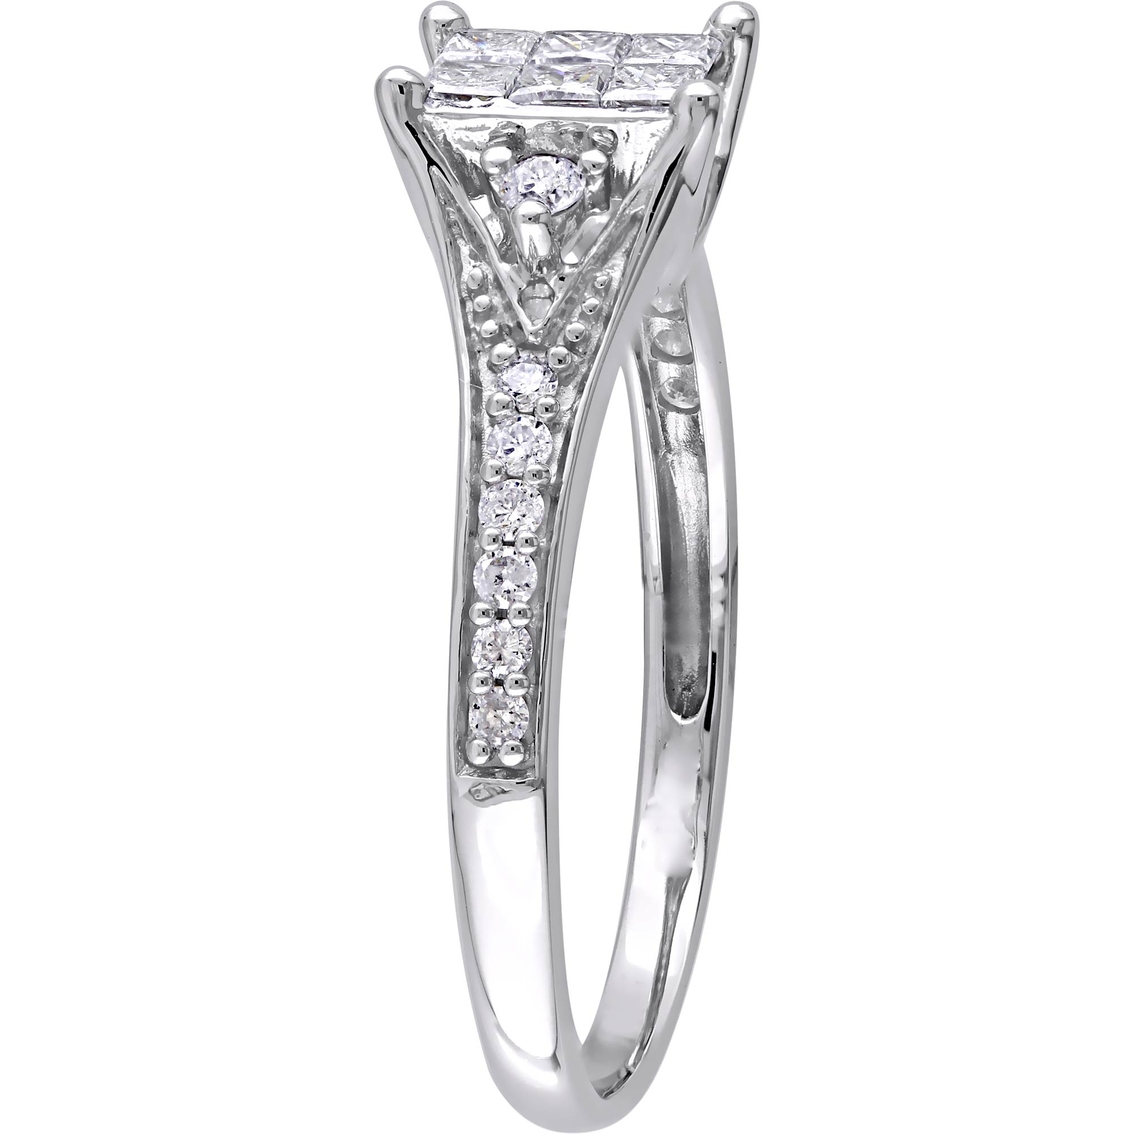 Diamore 10K White Gold 1/2 CTW Diamond Cluster Engagement Ring - Image 2 of 4